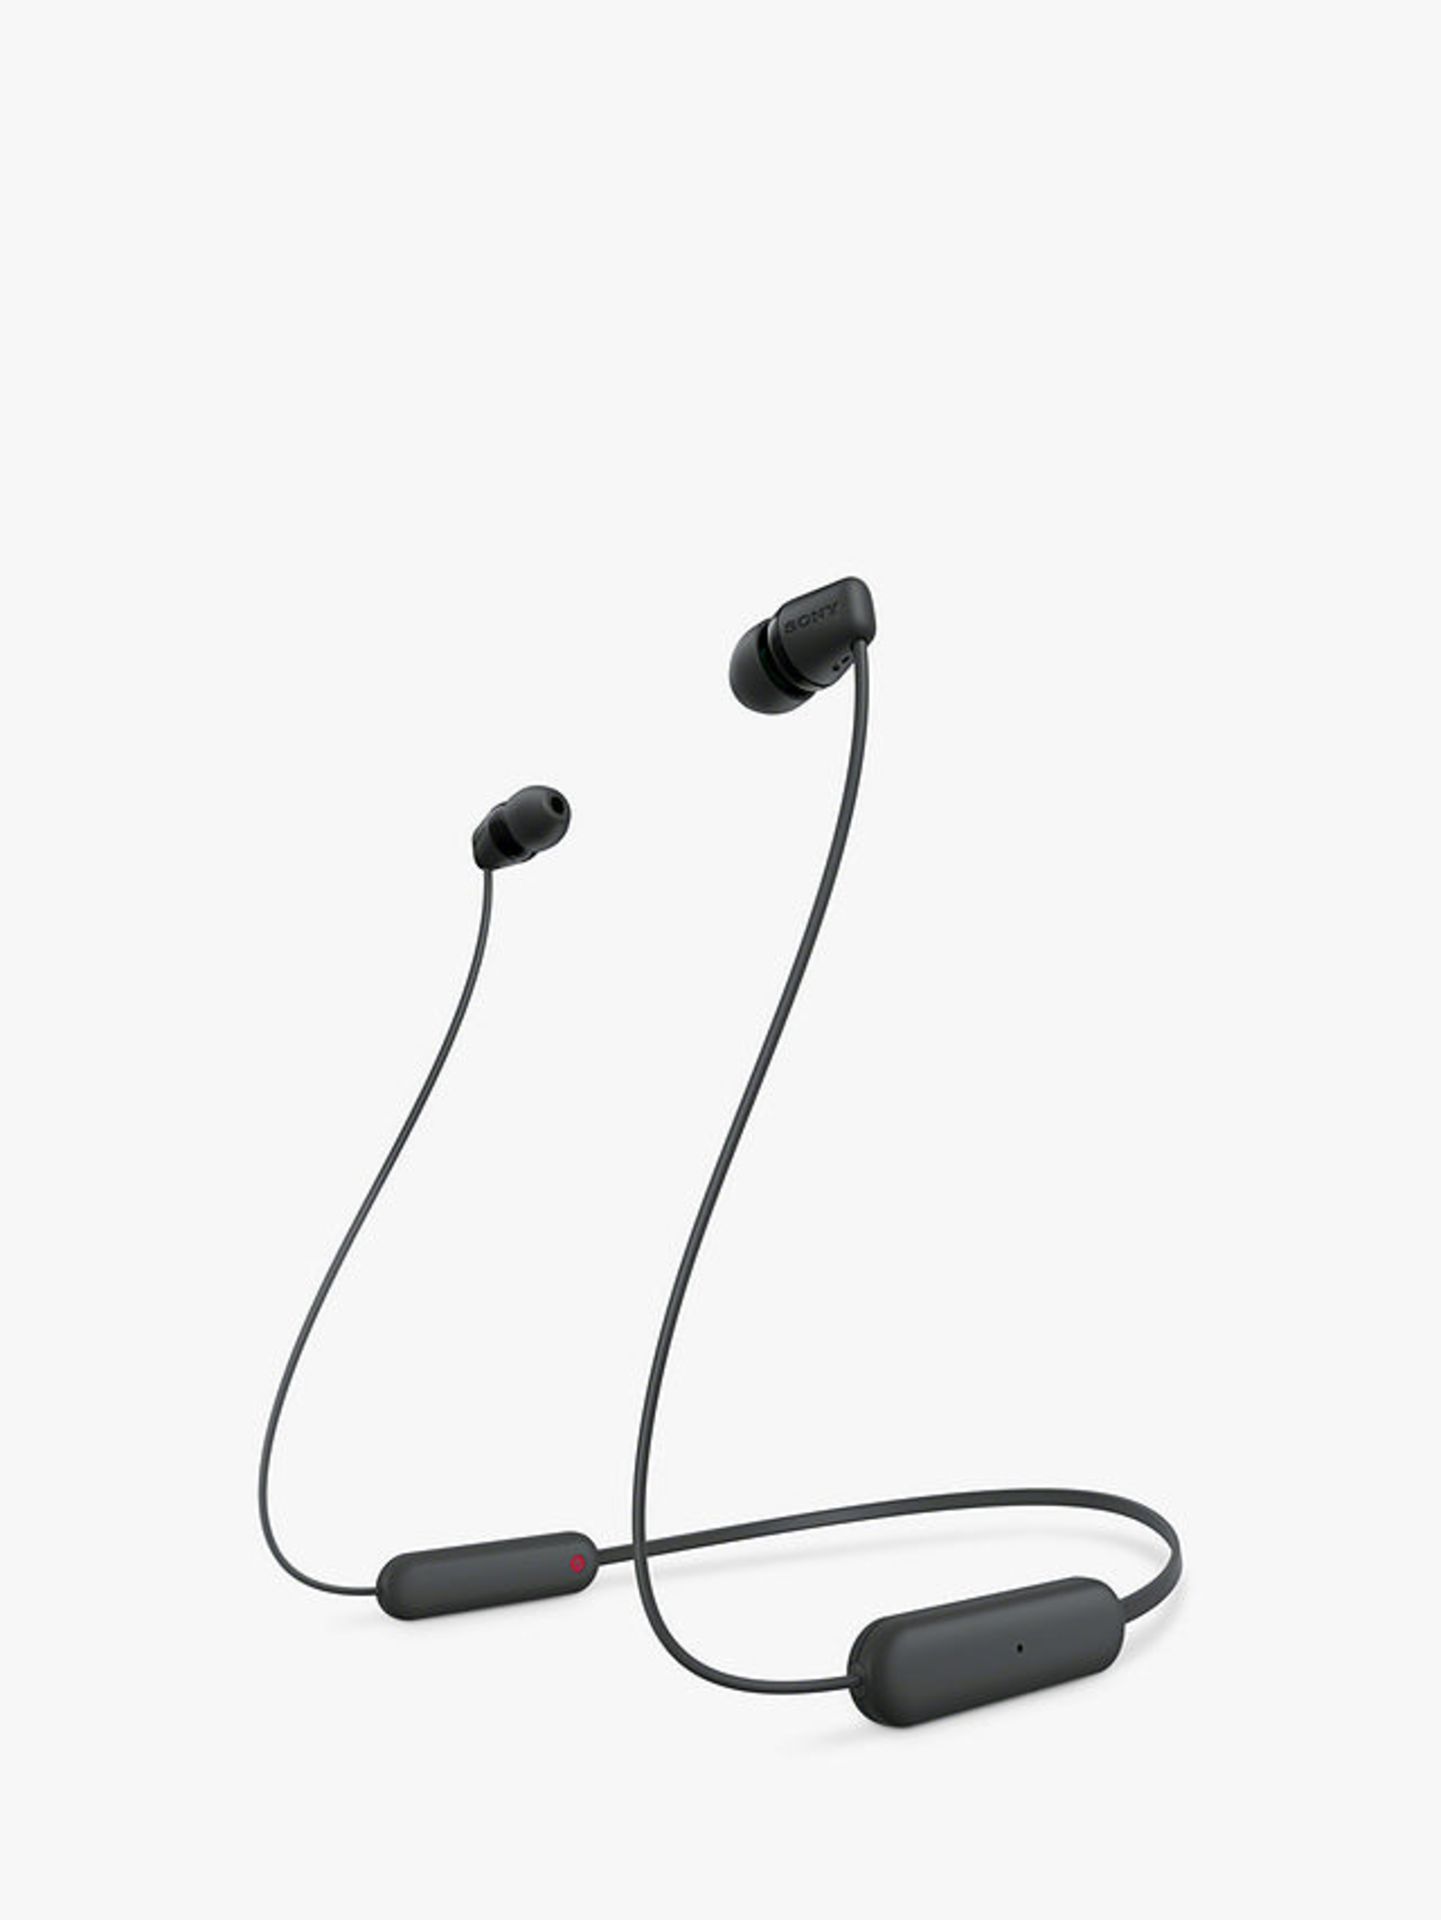 SONY WI-C100 BLUETOOTH WIRELESS IN-EAR HEADPHONES WITH MIC/REMOTE IN BLACK - RRP £35